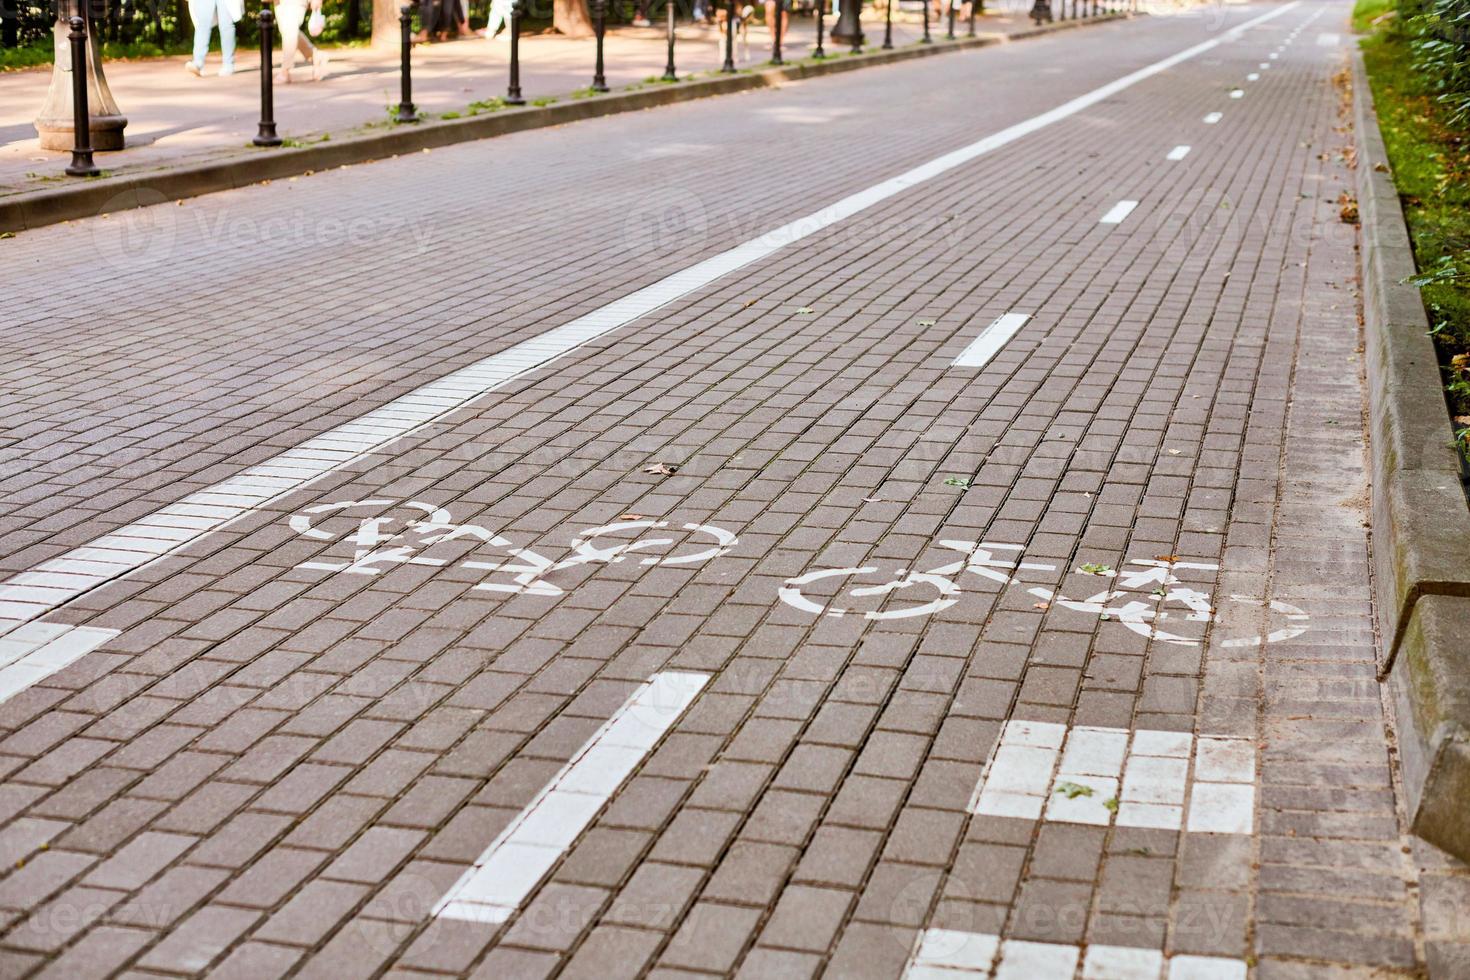 Two way cycle path, marking bike path on sidewalk, white painted bicycle sign on road, cycle symbol photo